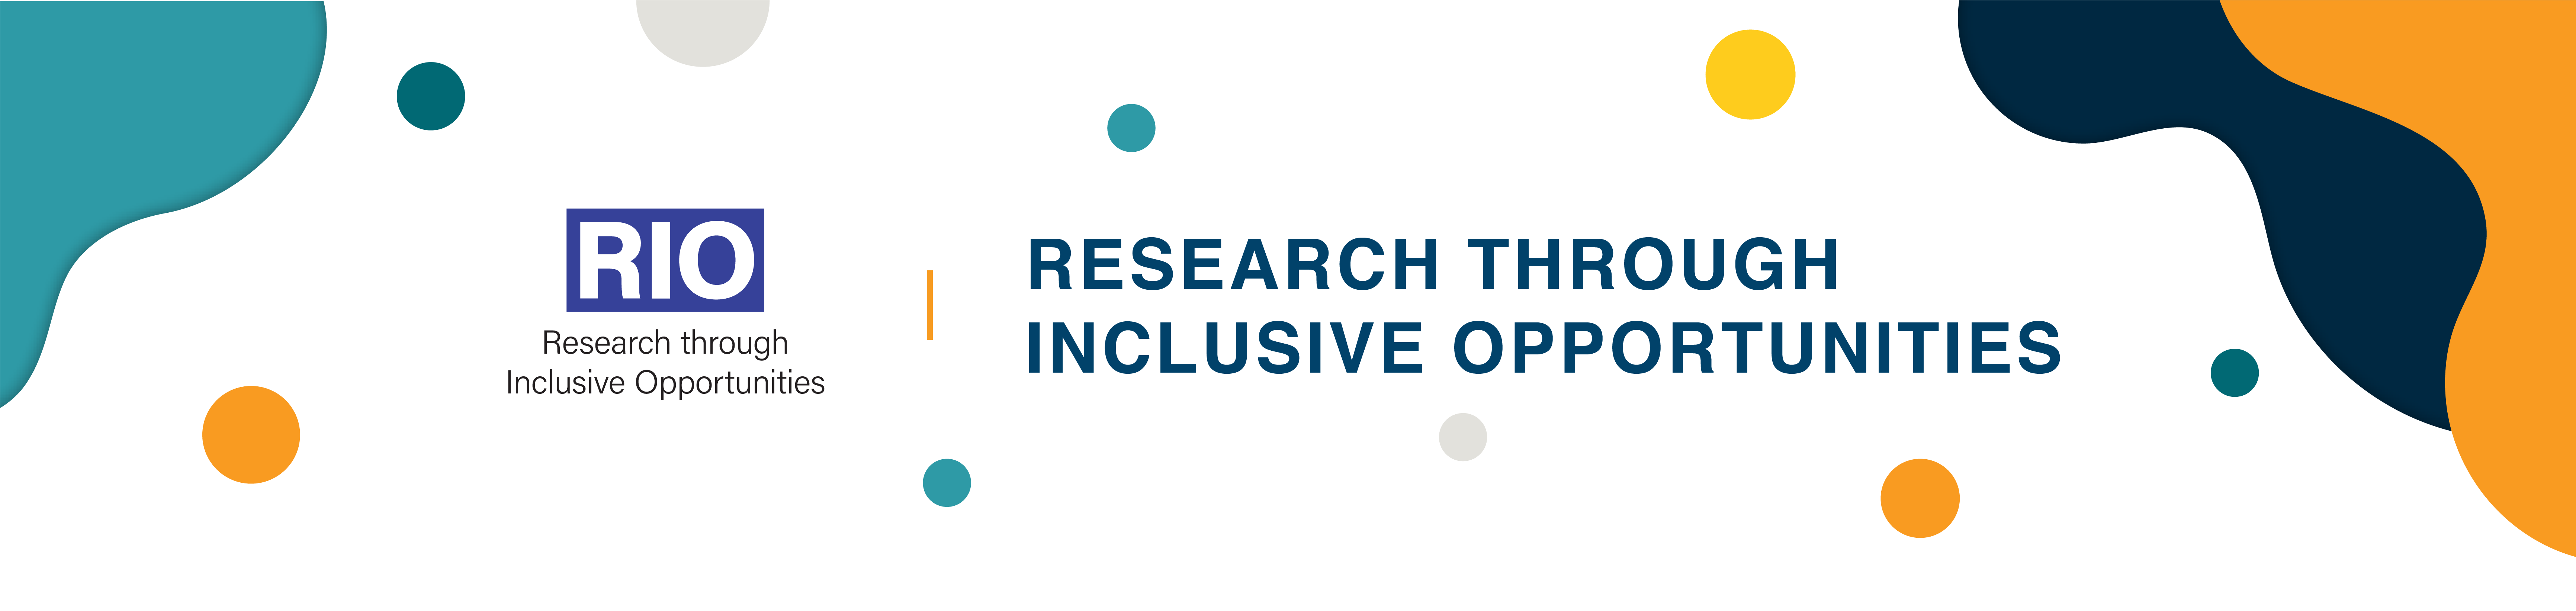 Research through Inclusive Opportunities